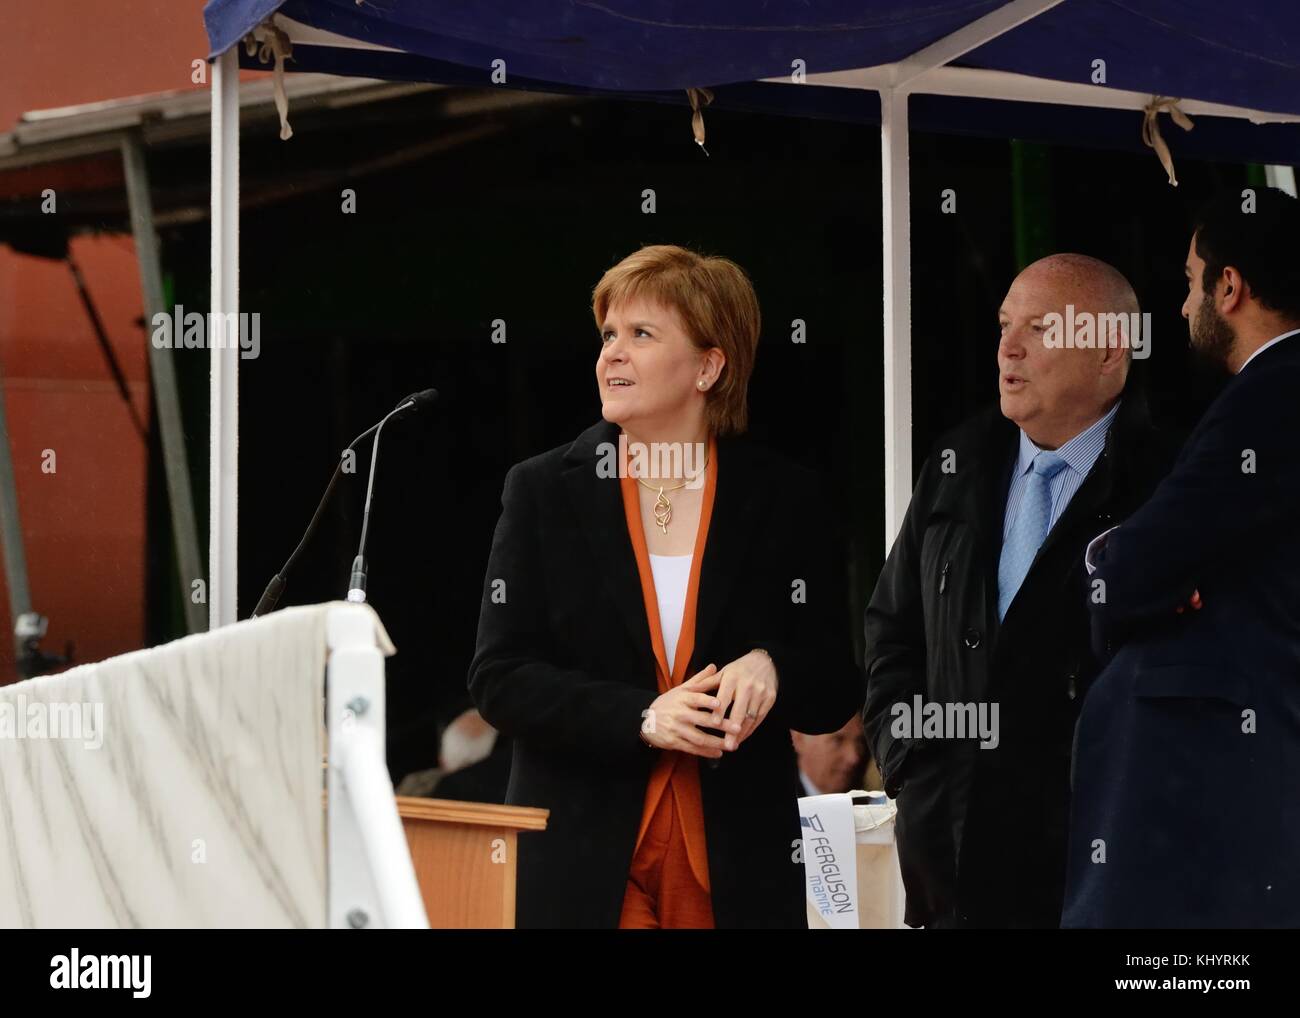 Port Glasgow, Scotland, UK. 21st Nov, 2017. First Minister, Nicola Sturgeon launches the Glen Sannox car ferry on the river Clyde at Ferguson's in Port Glasgow as Jim McCall and Humza Yousaf watch on. Stock Photo